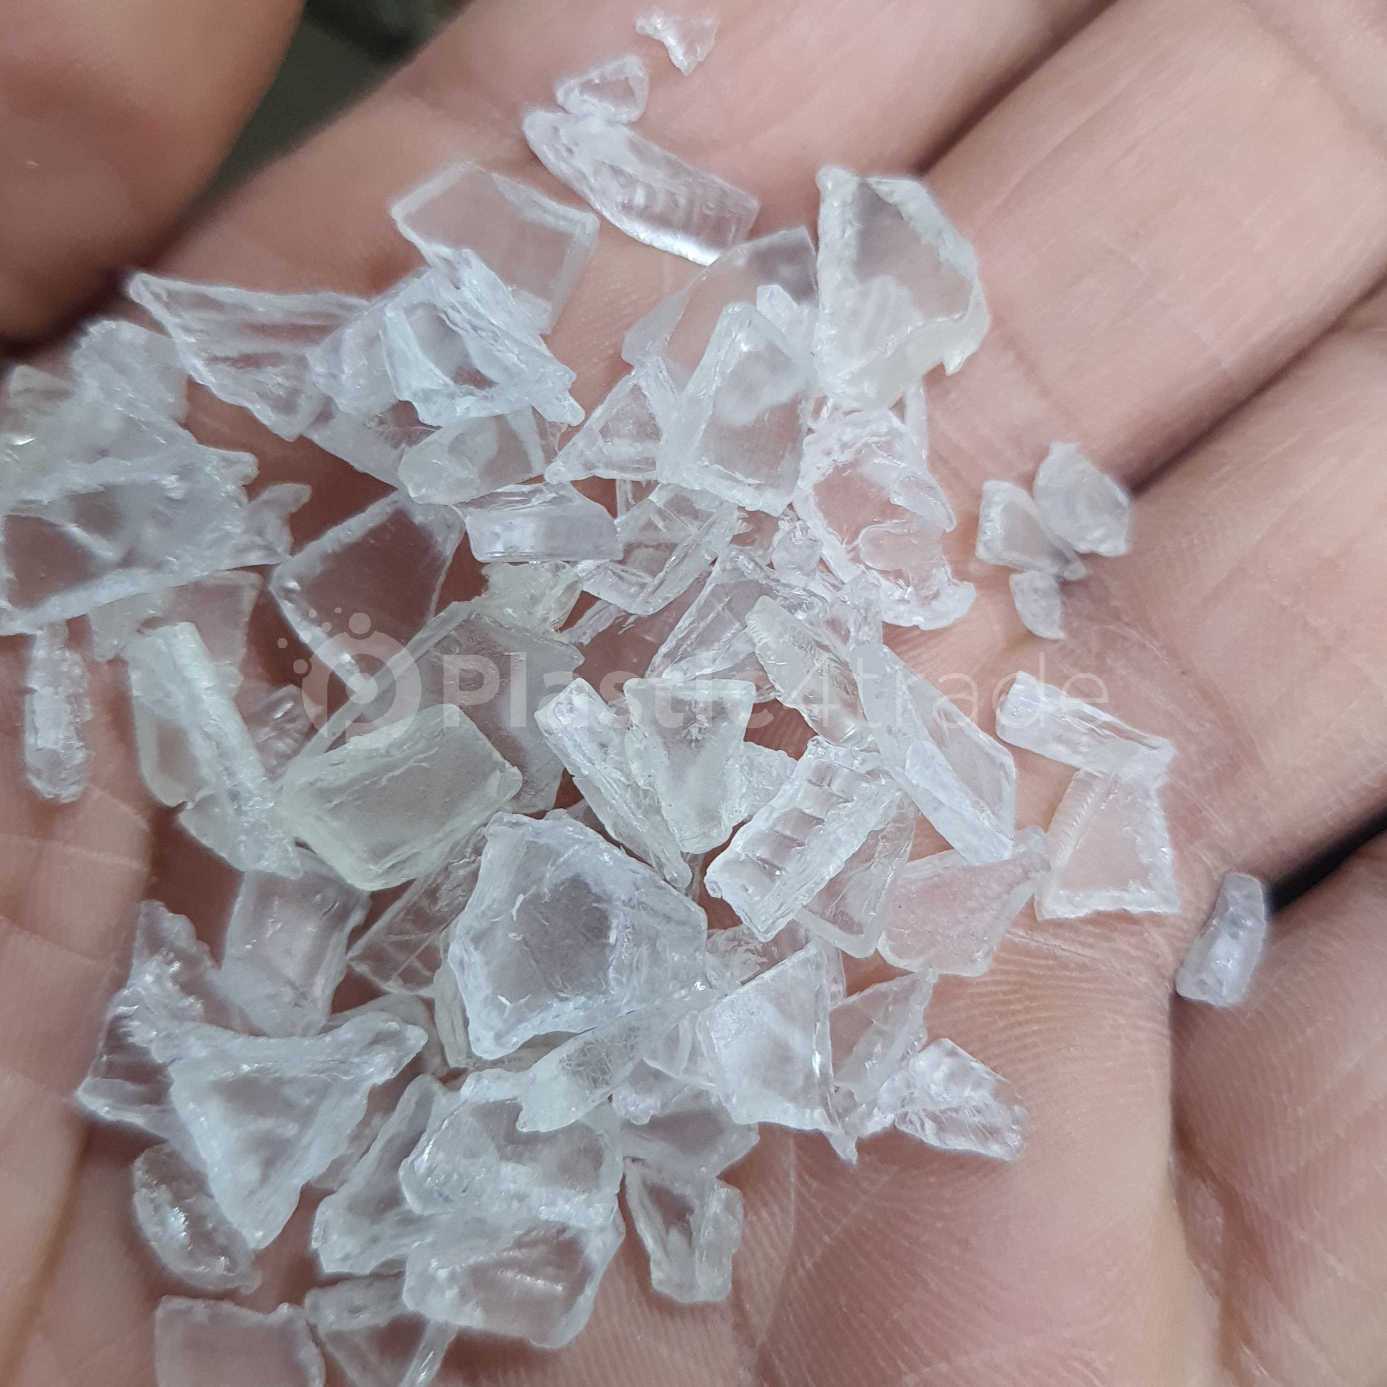 POLYCARBONATE CLEAR NATURAL PC Grinding Injection Molding  india Plastic4trade